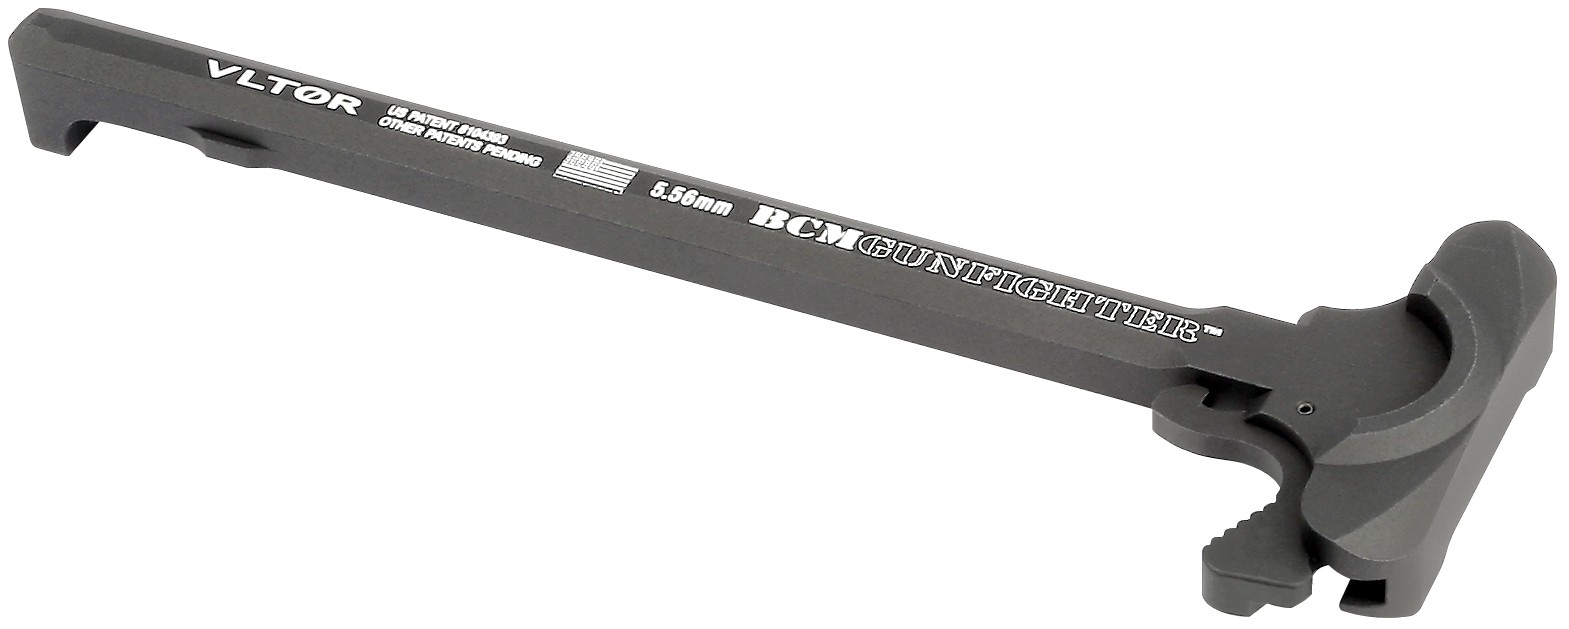 BCMGUNFIGHTER Charging Handle 5.56 (Mod 5)- BCM-GFH5